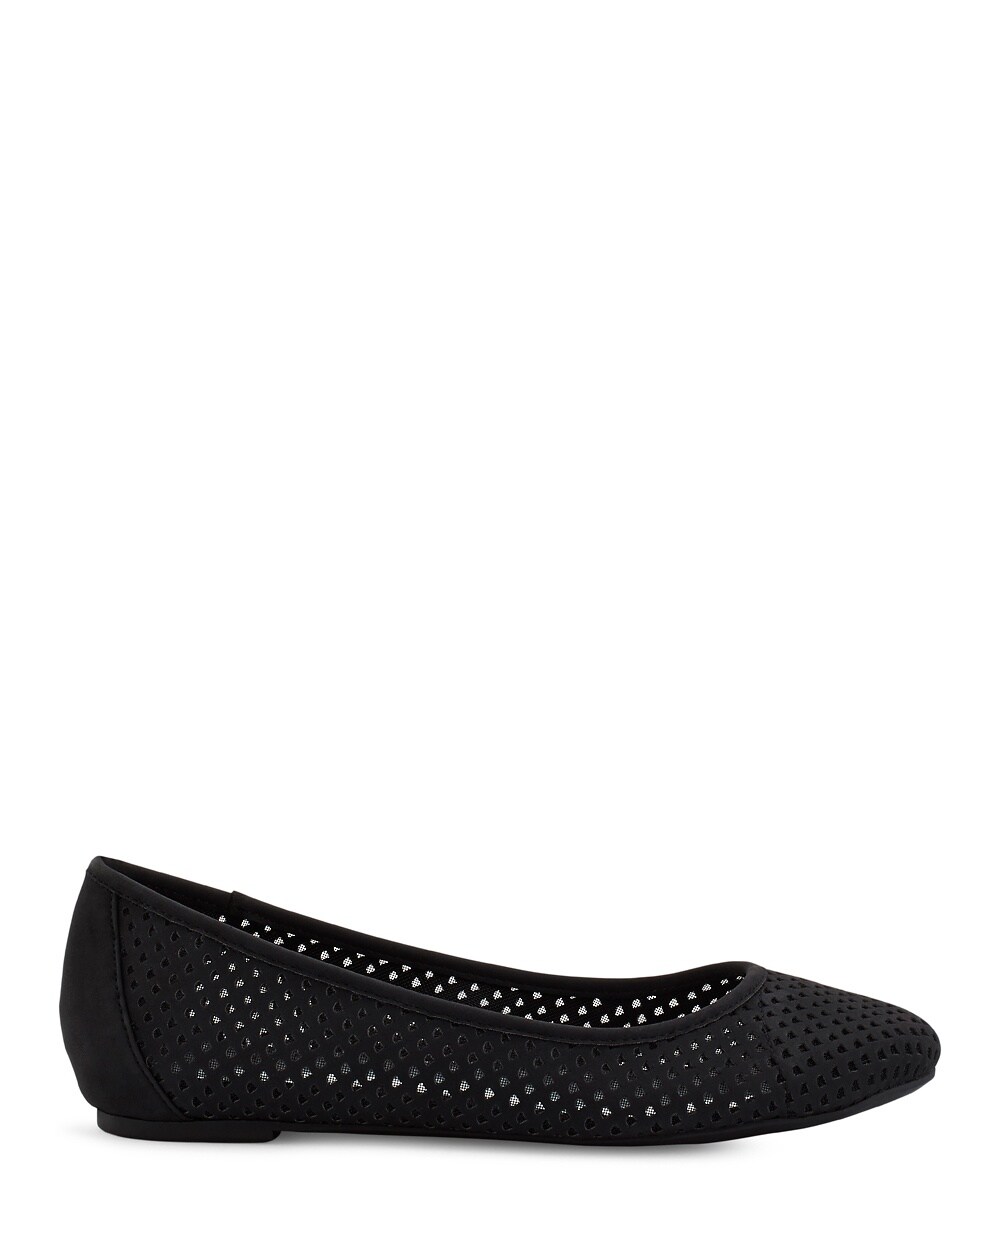 Perforated Black Flats